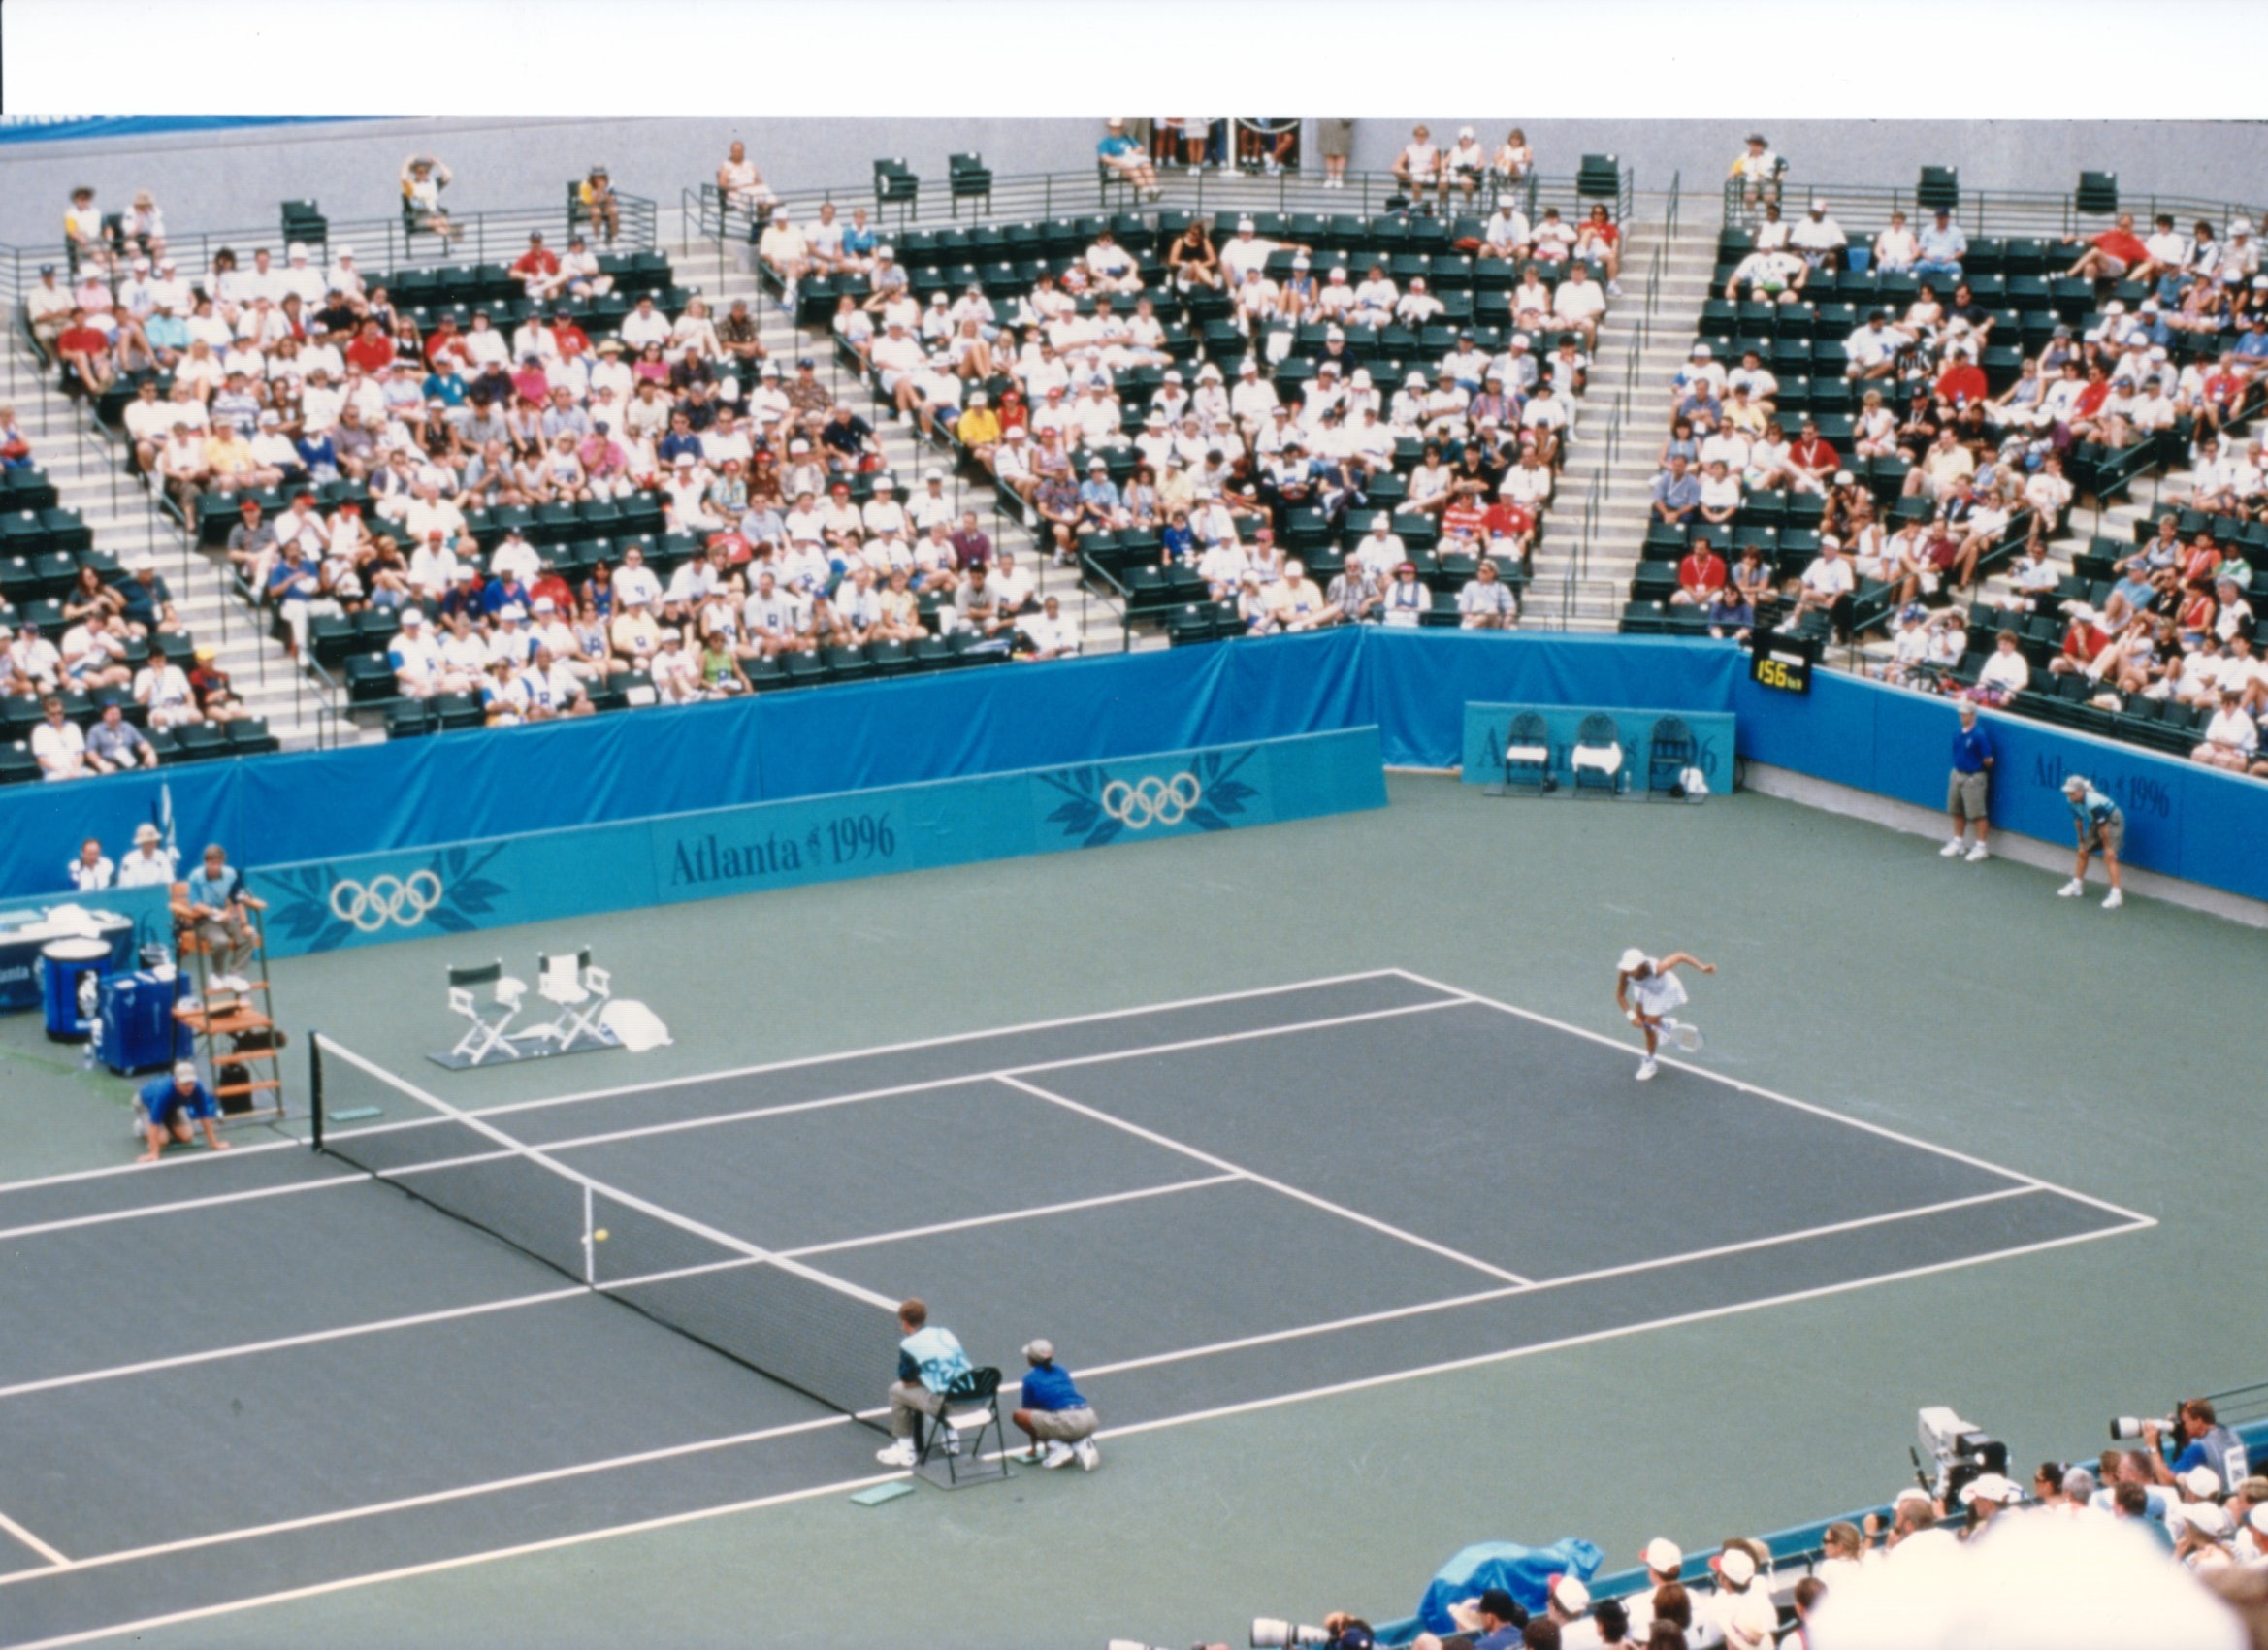 Olympic Tennis Venues: Who Takes Gold? - California Sports ...